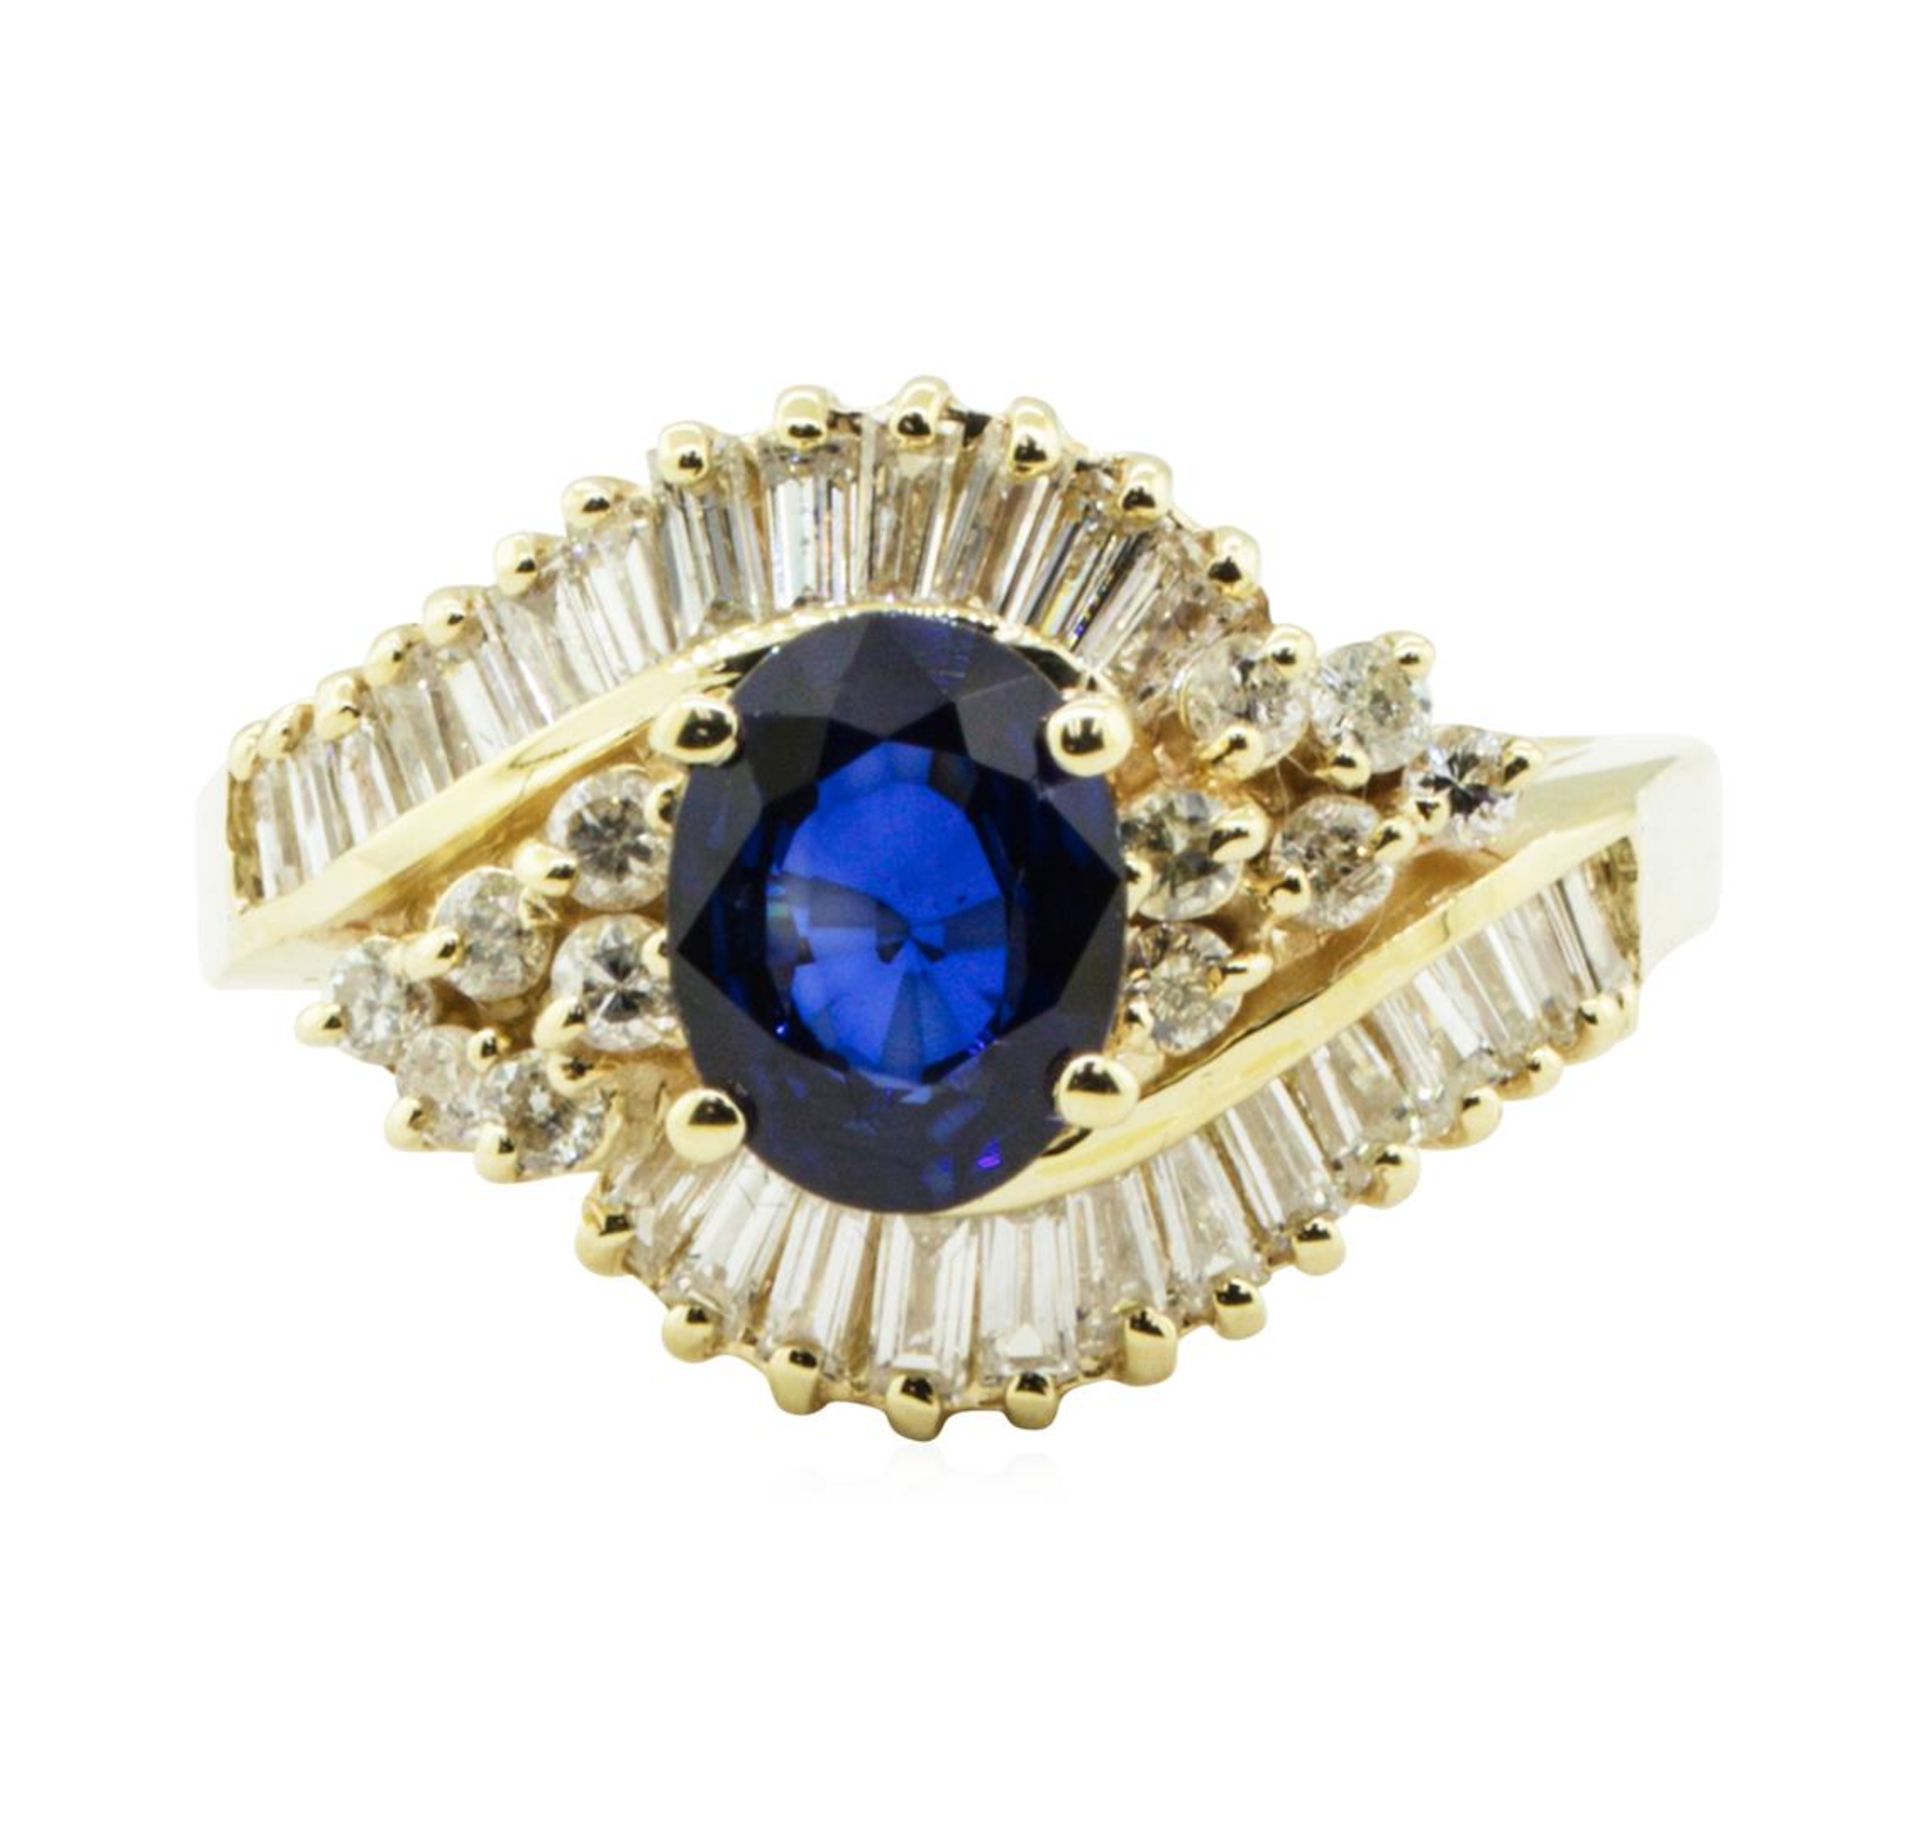 2.19 ctw Oval Brilliant Blue Sapphire And Diamond Ring - 14KT Yellow Gold - Image 2 of 5